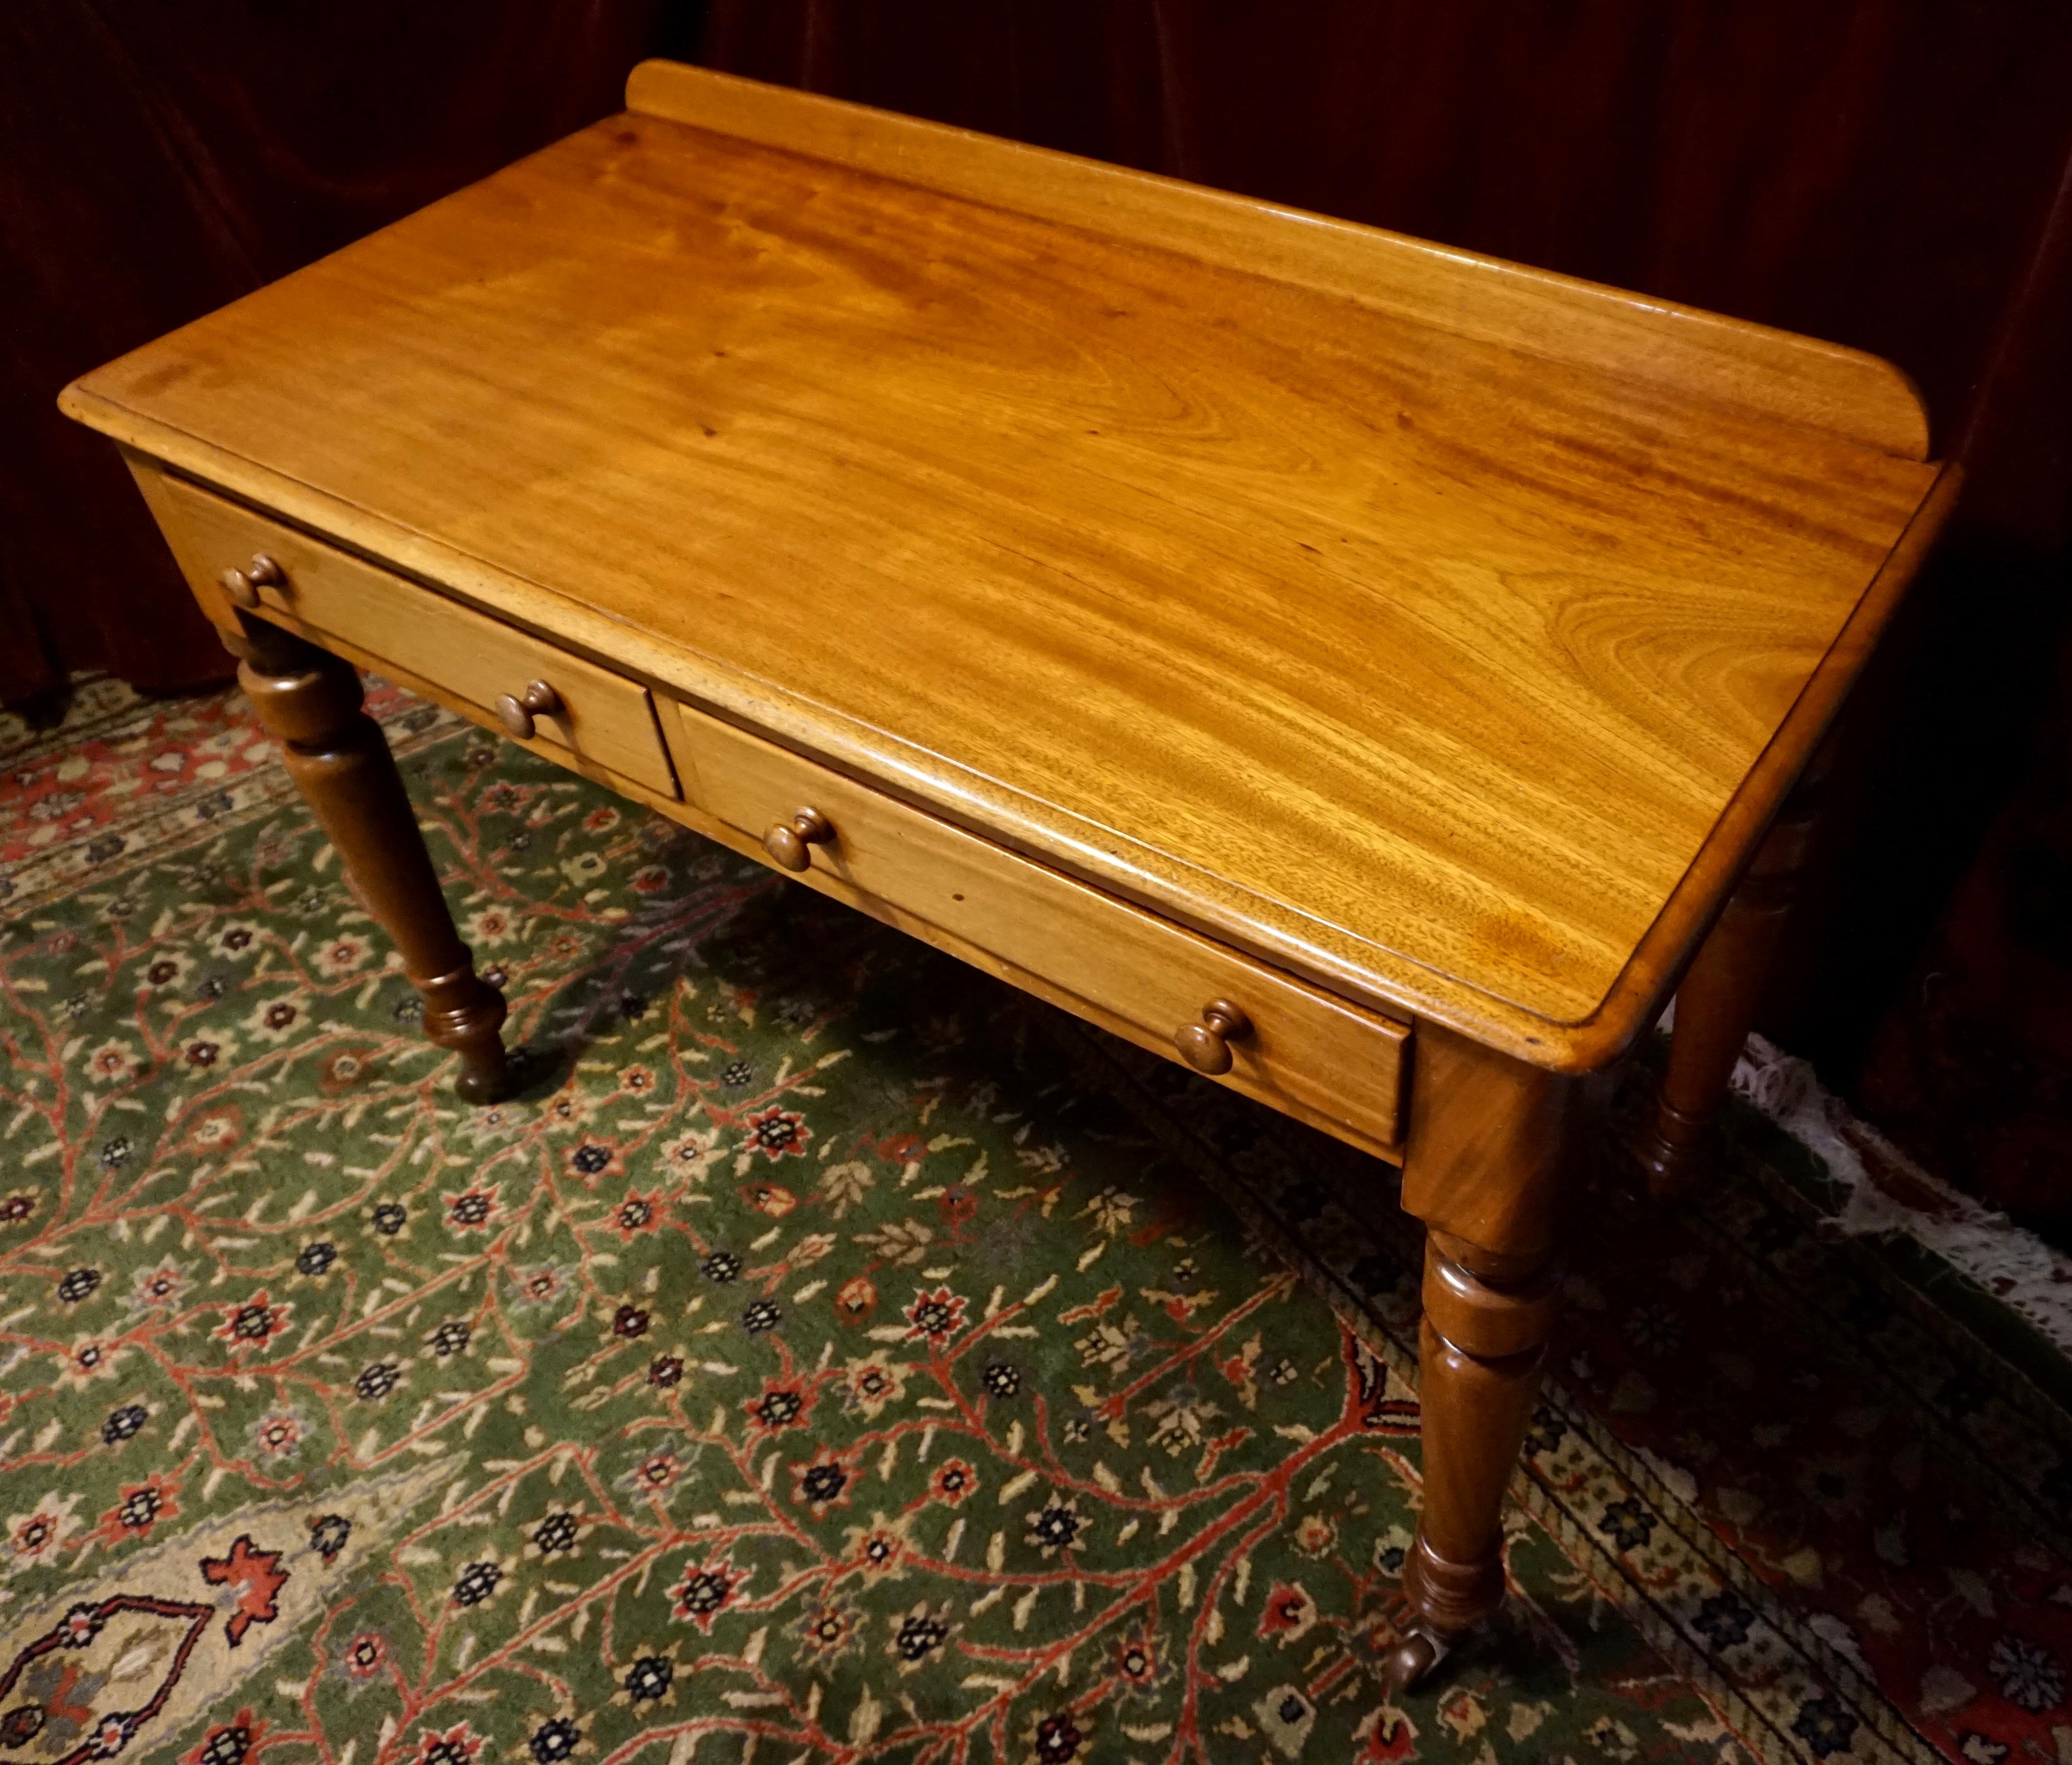 Simplicity of form and elegance shines through this beautiful Victorian writing desk; hand-crafted from old growth Mahogany. Warm, free flowing grains matched with old world craftsmanship add refinement. Porcelain casters on brass are original to it